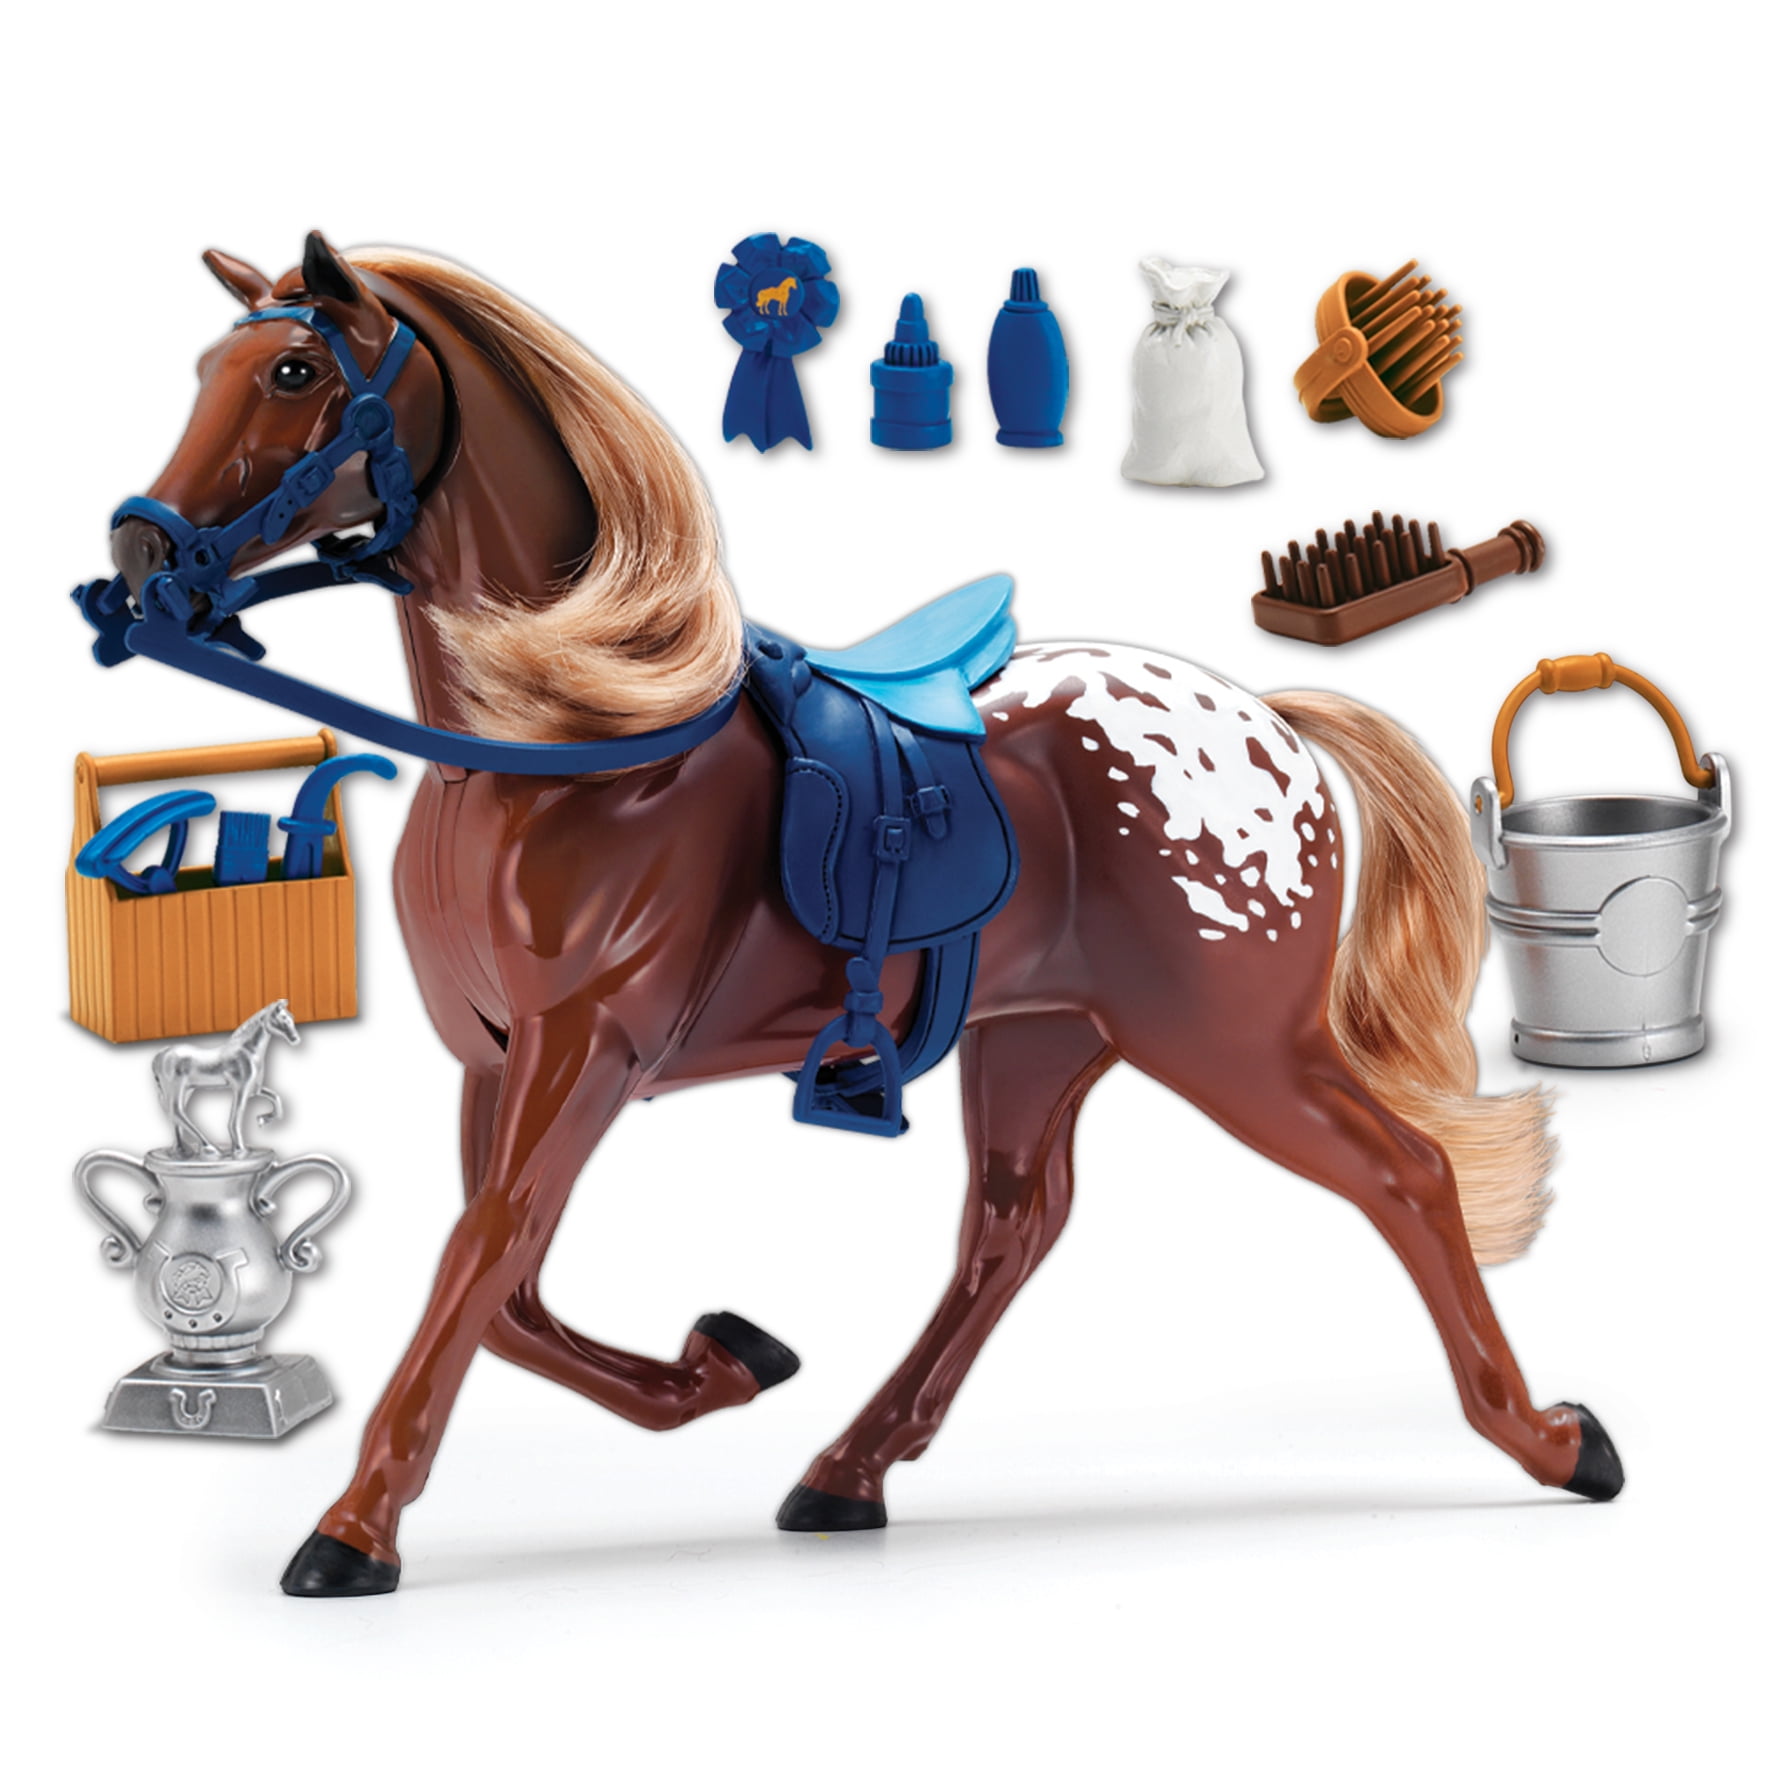 A to Z 31029 Harriet The Horse Playset Girls Toy Gift Set 